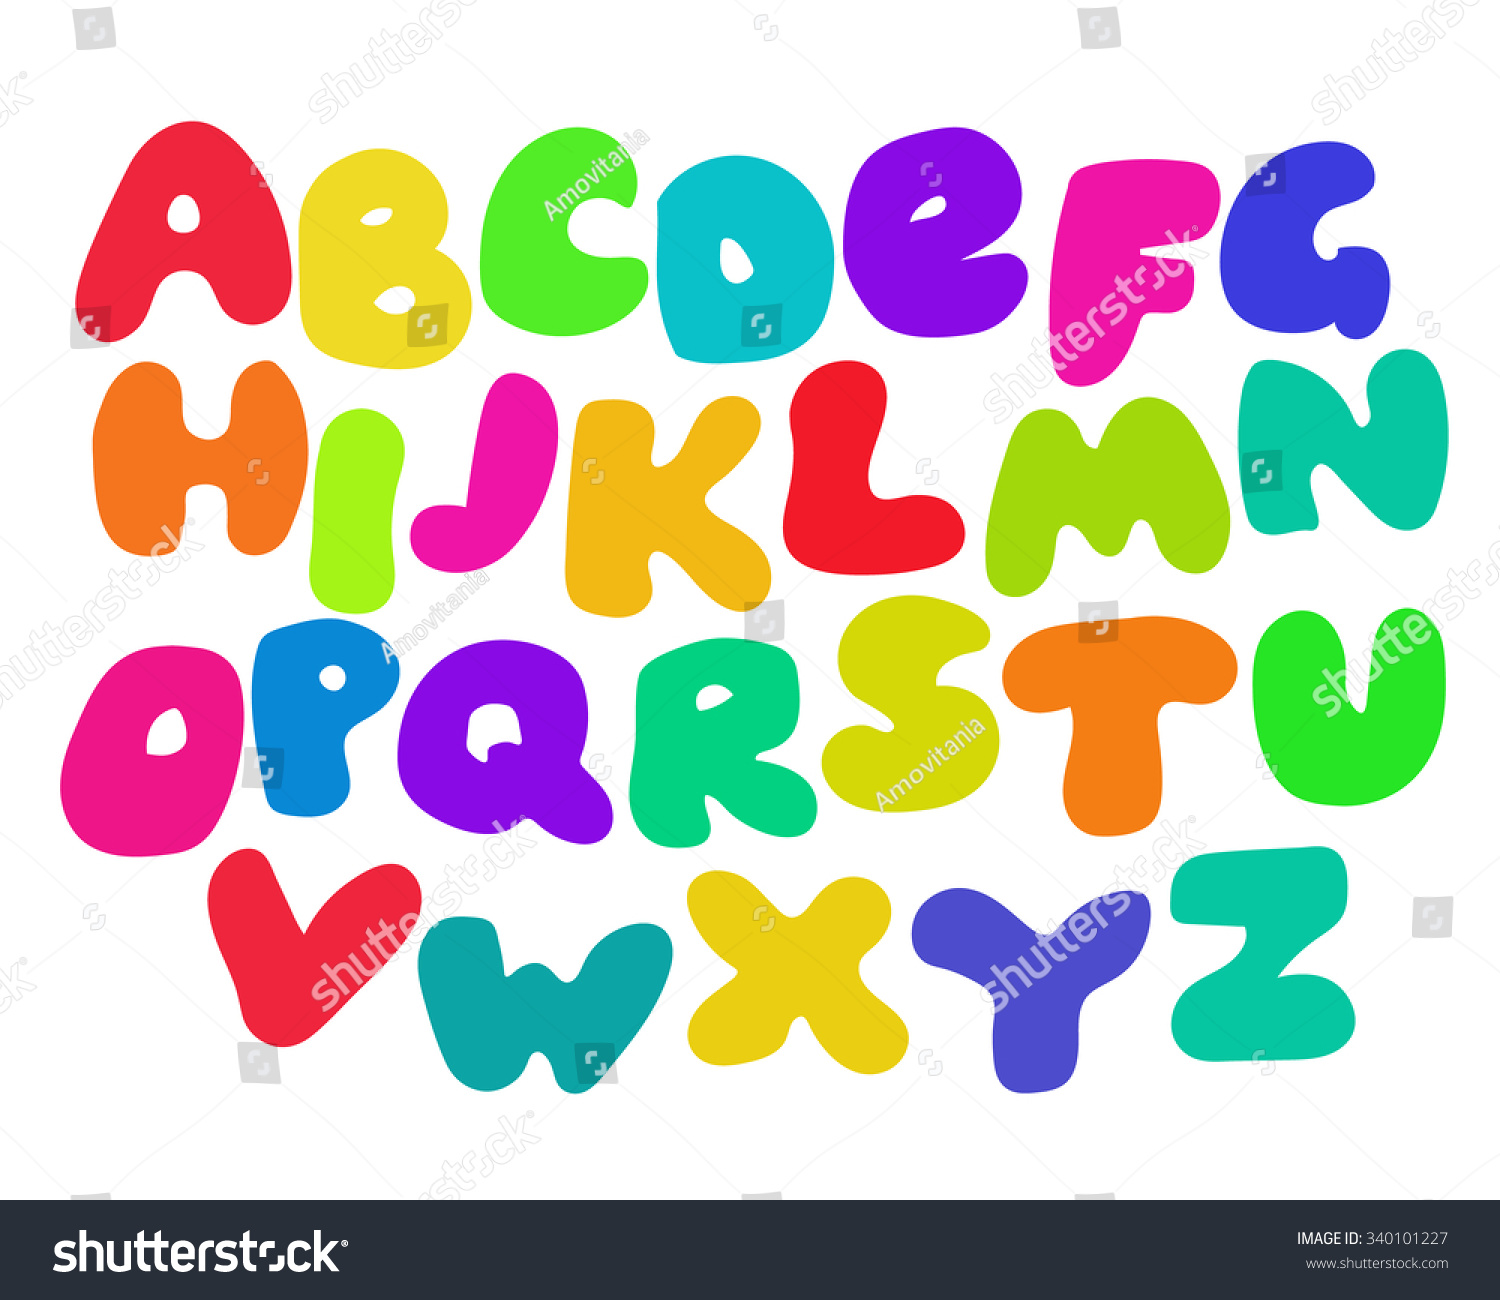 Funny Colorful Alphabet Poster Children Cute Stock Vector 340101227 ...